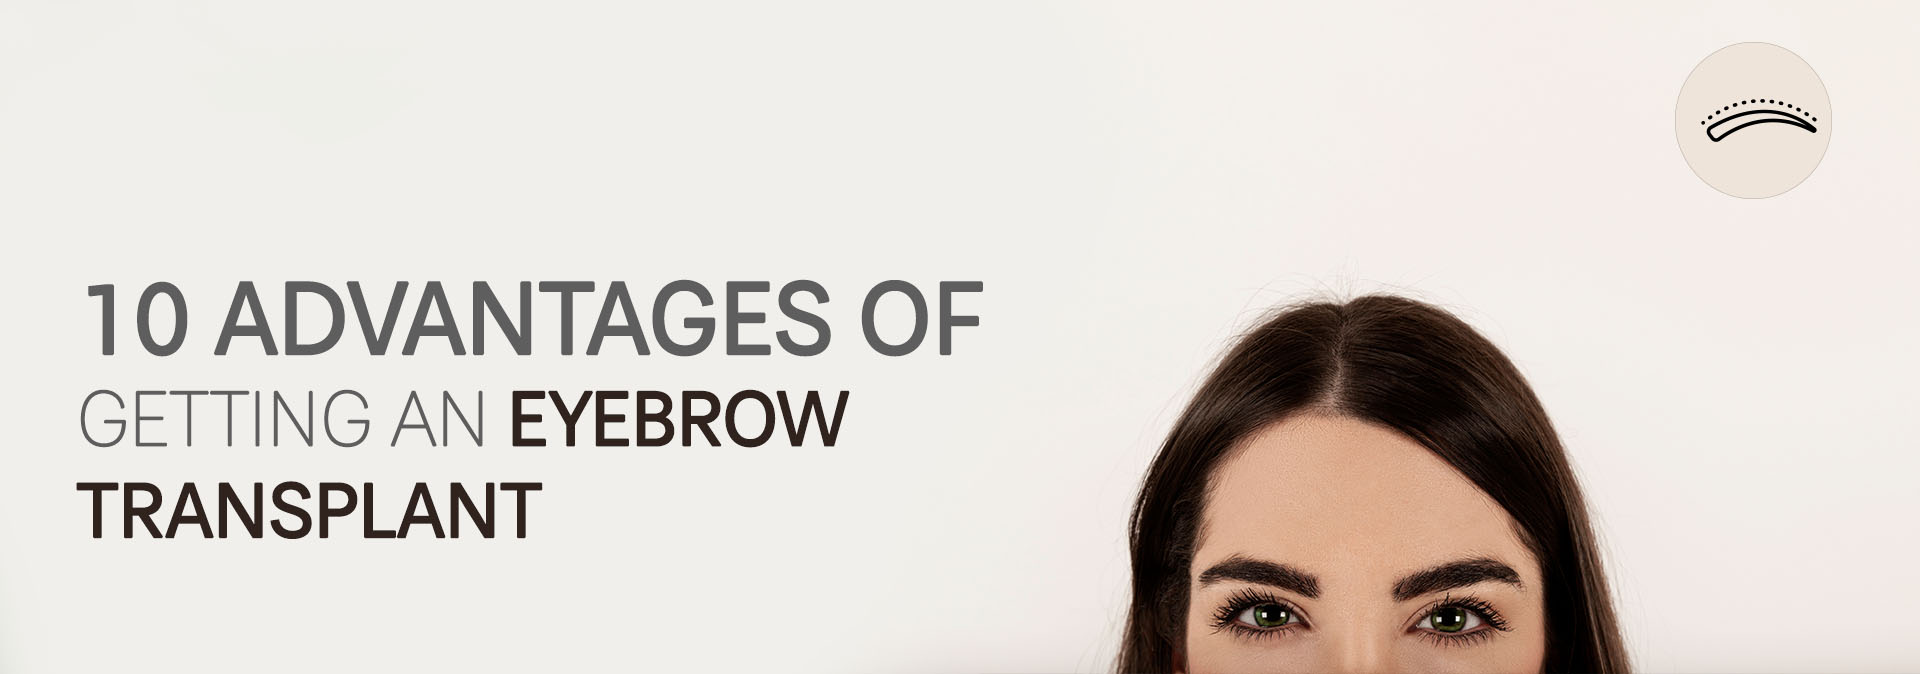 10 advantages of getting an eyebrow transplant.